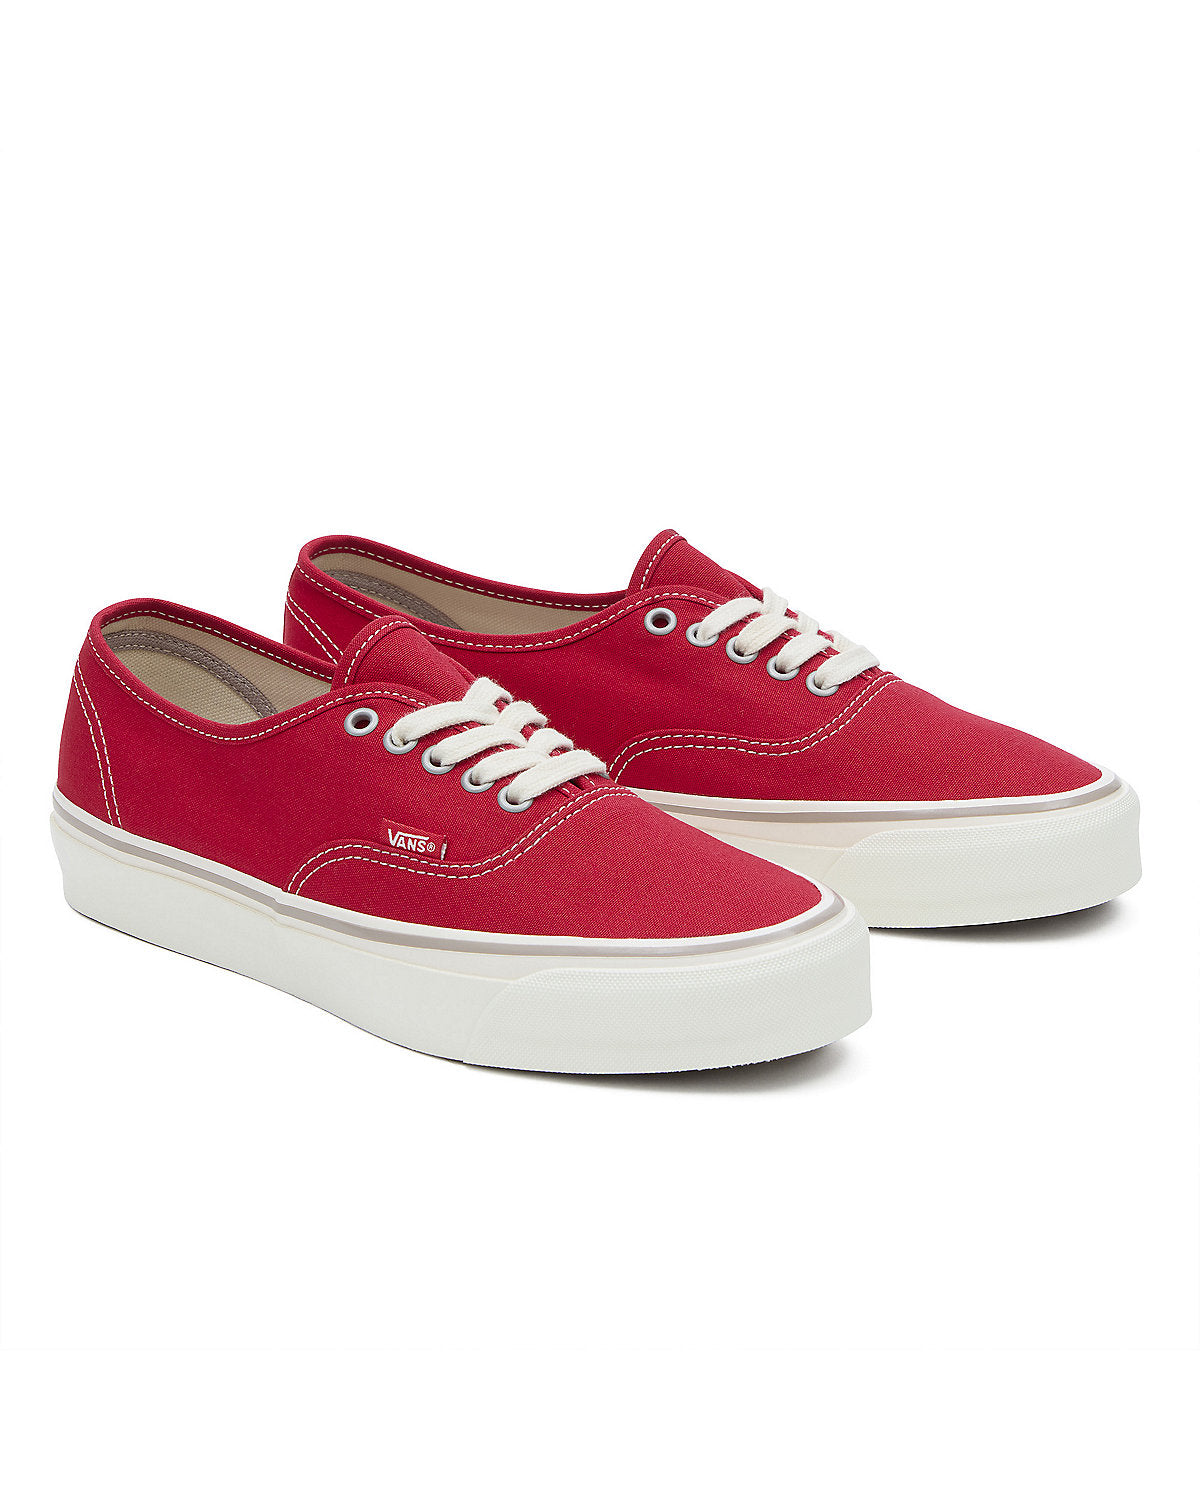 VANS Unisex Authentic Reissue 44 Racing Trainers - Red / Marshmallow